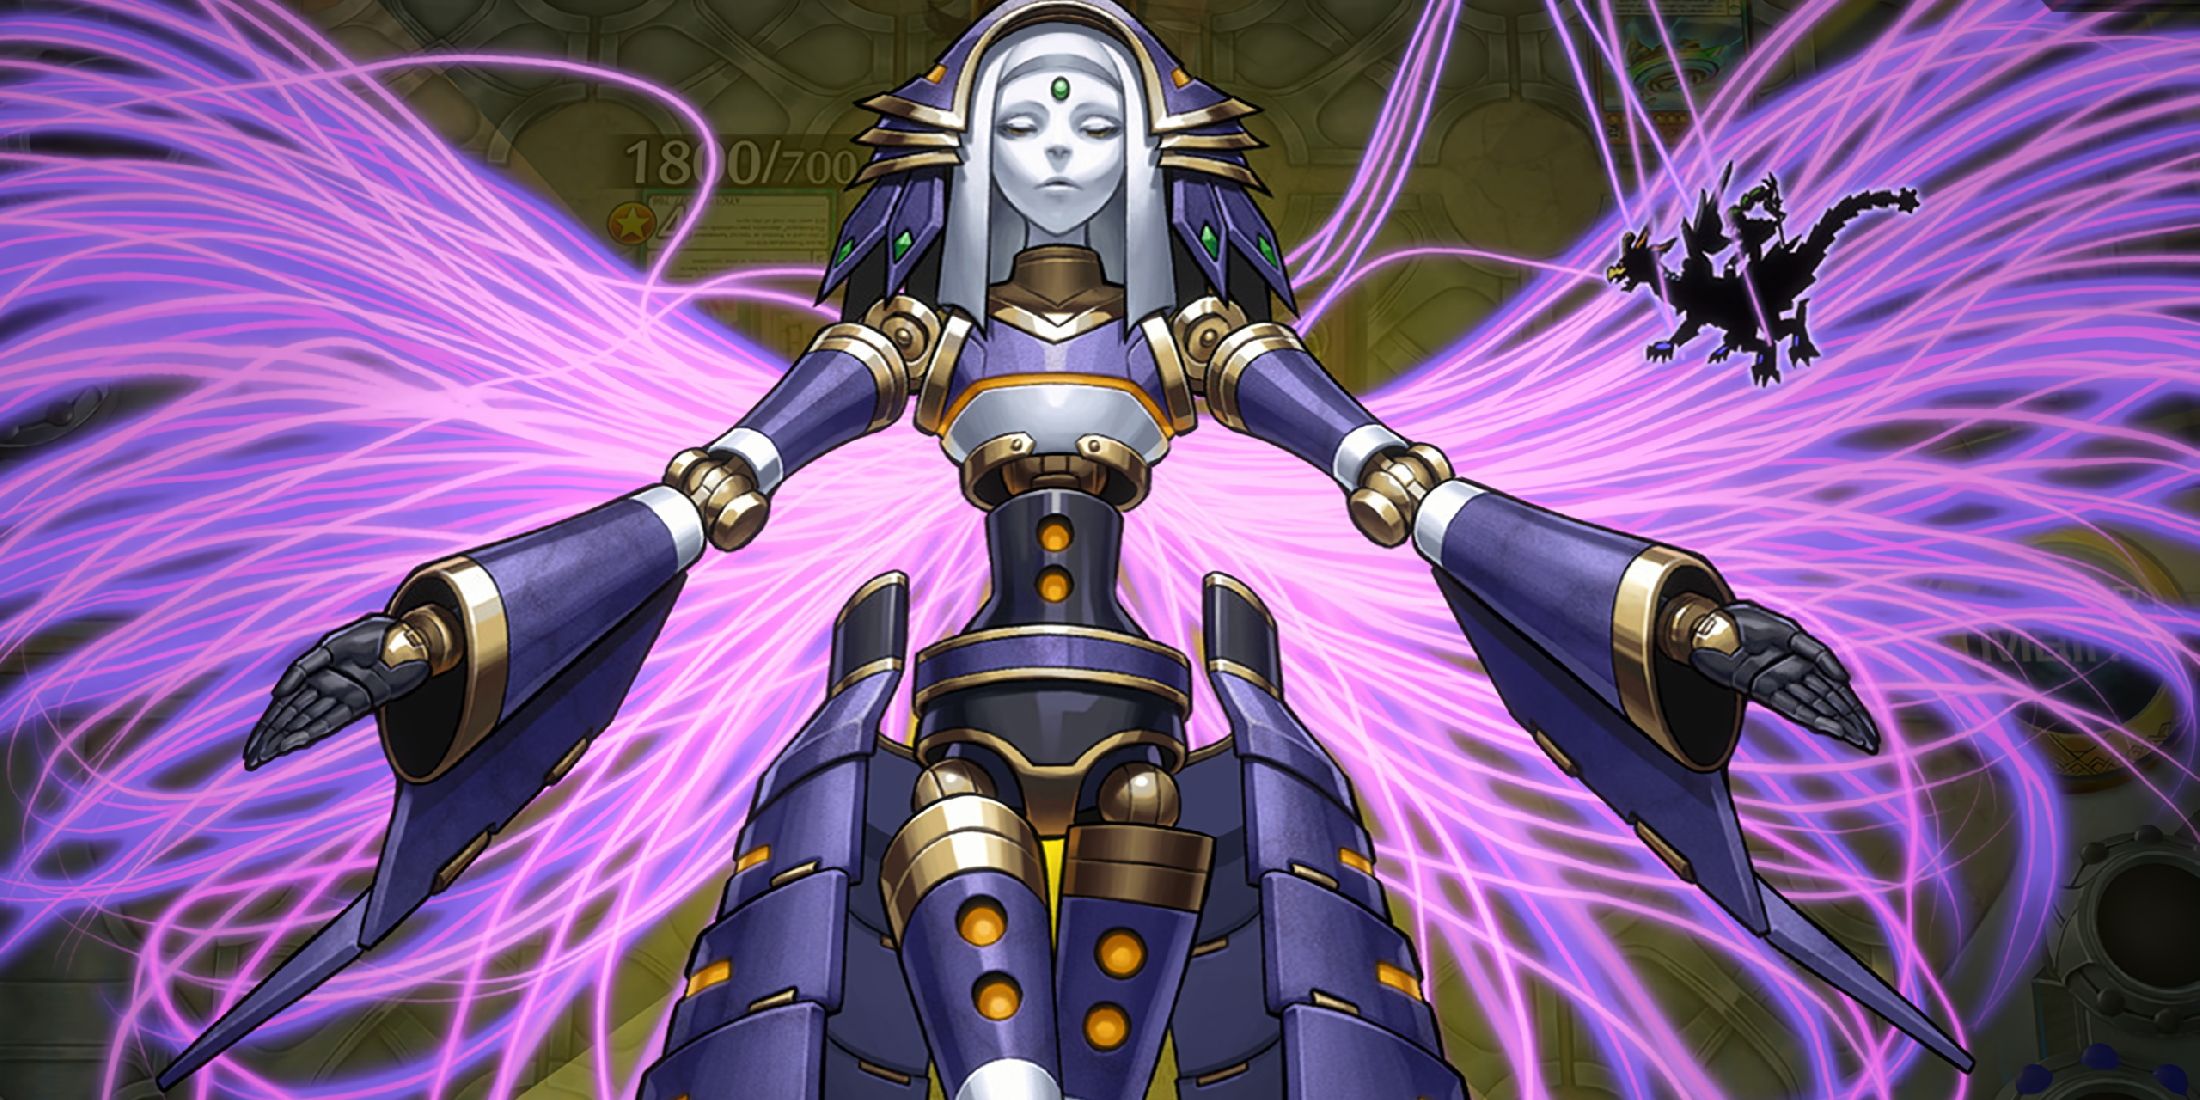 A screenshot from Yu-Gi-Oh Master Duel showing El Shaddoll Construct.